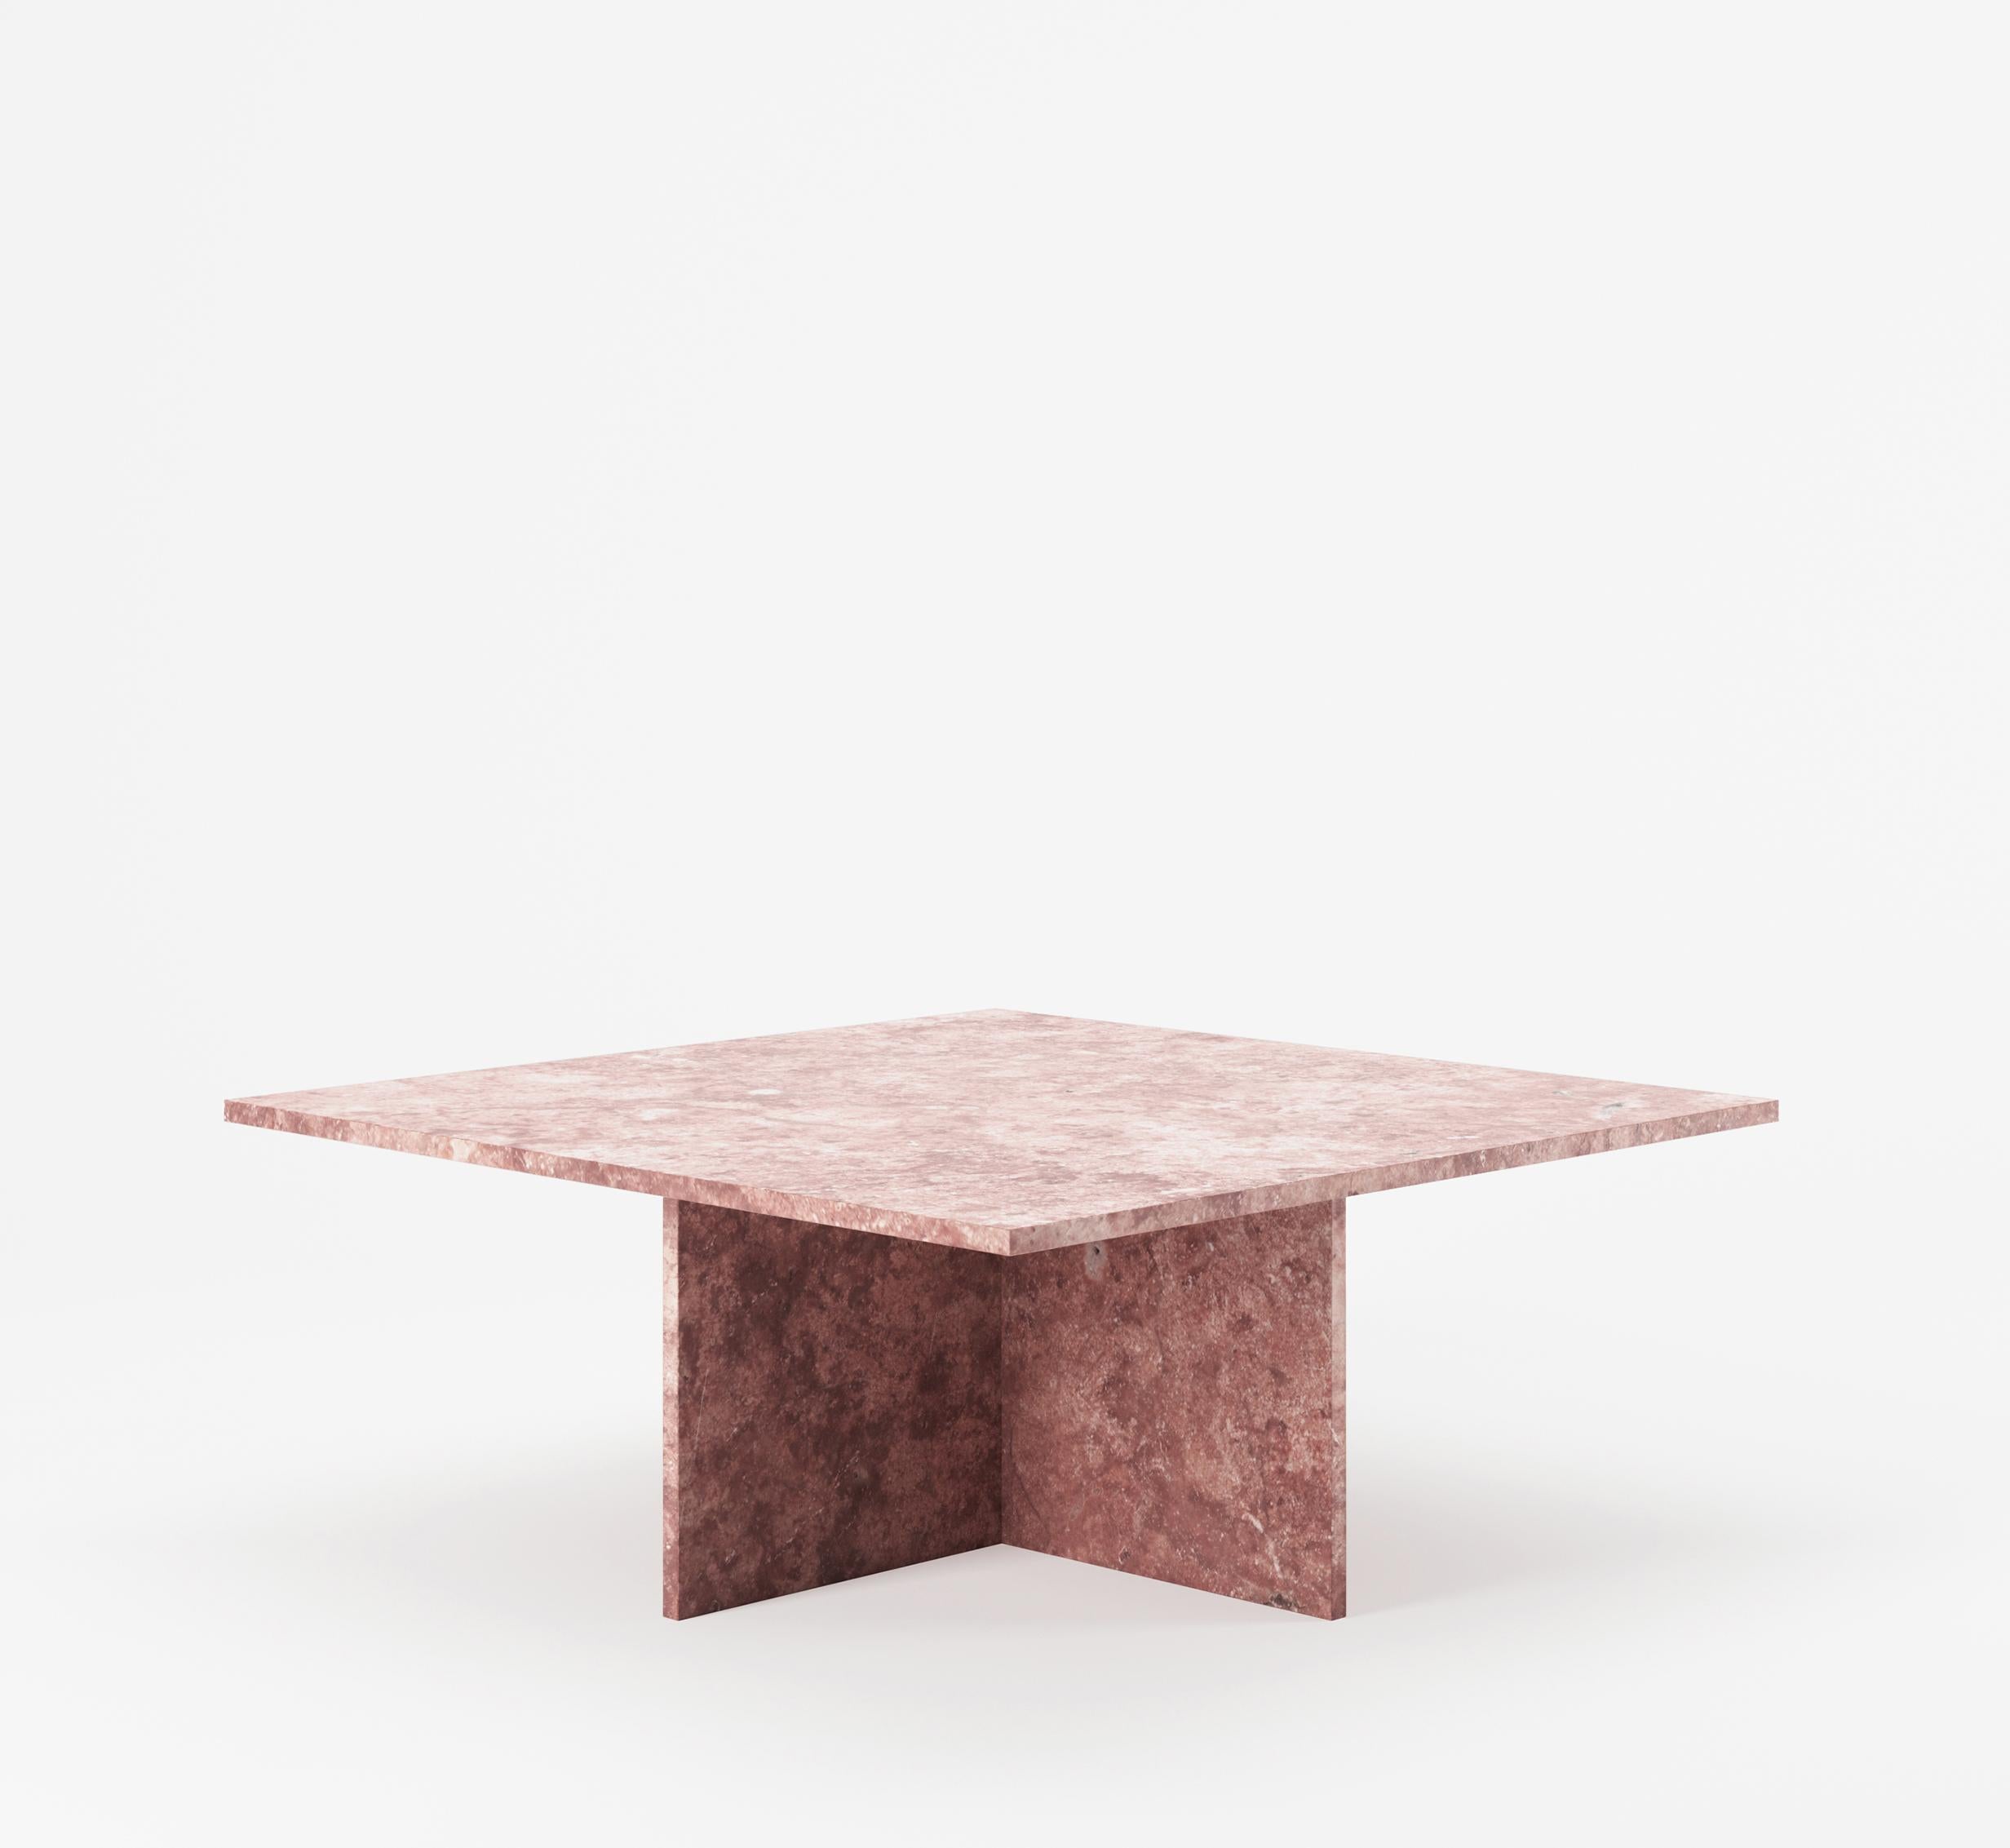 Minimalist Vondel Square Table Handcrafted in Red Travertine For Sale